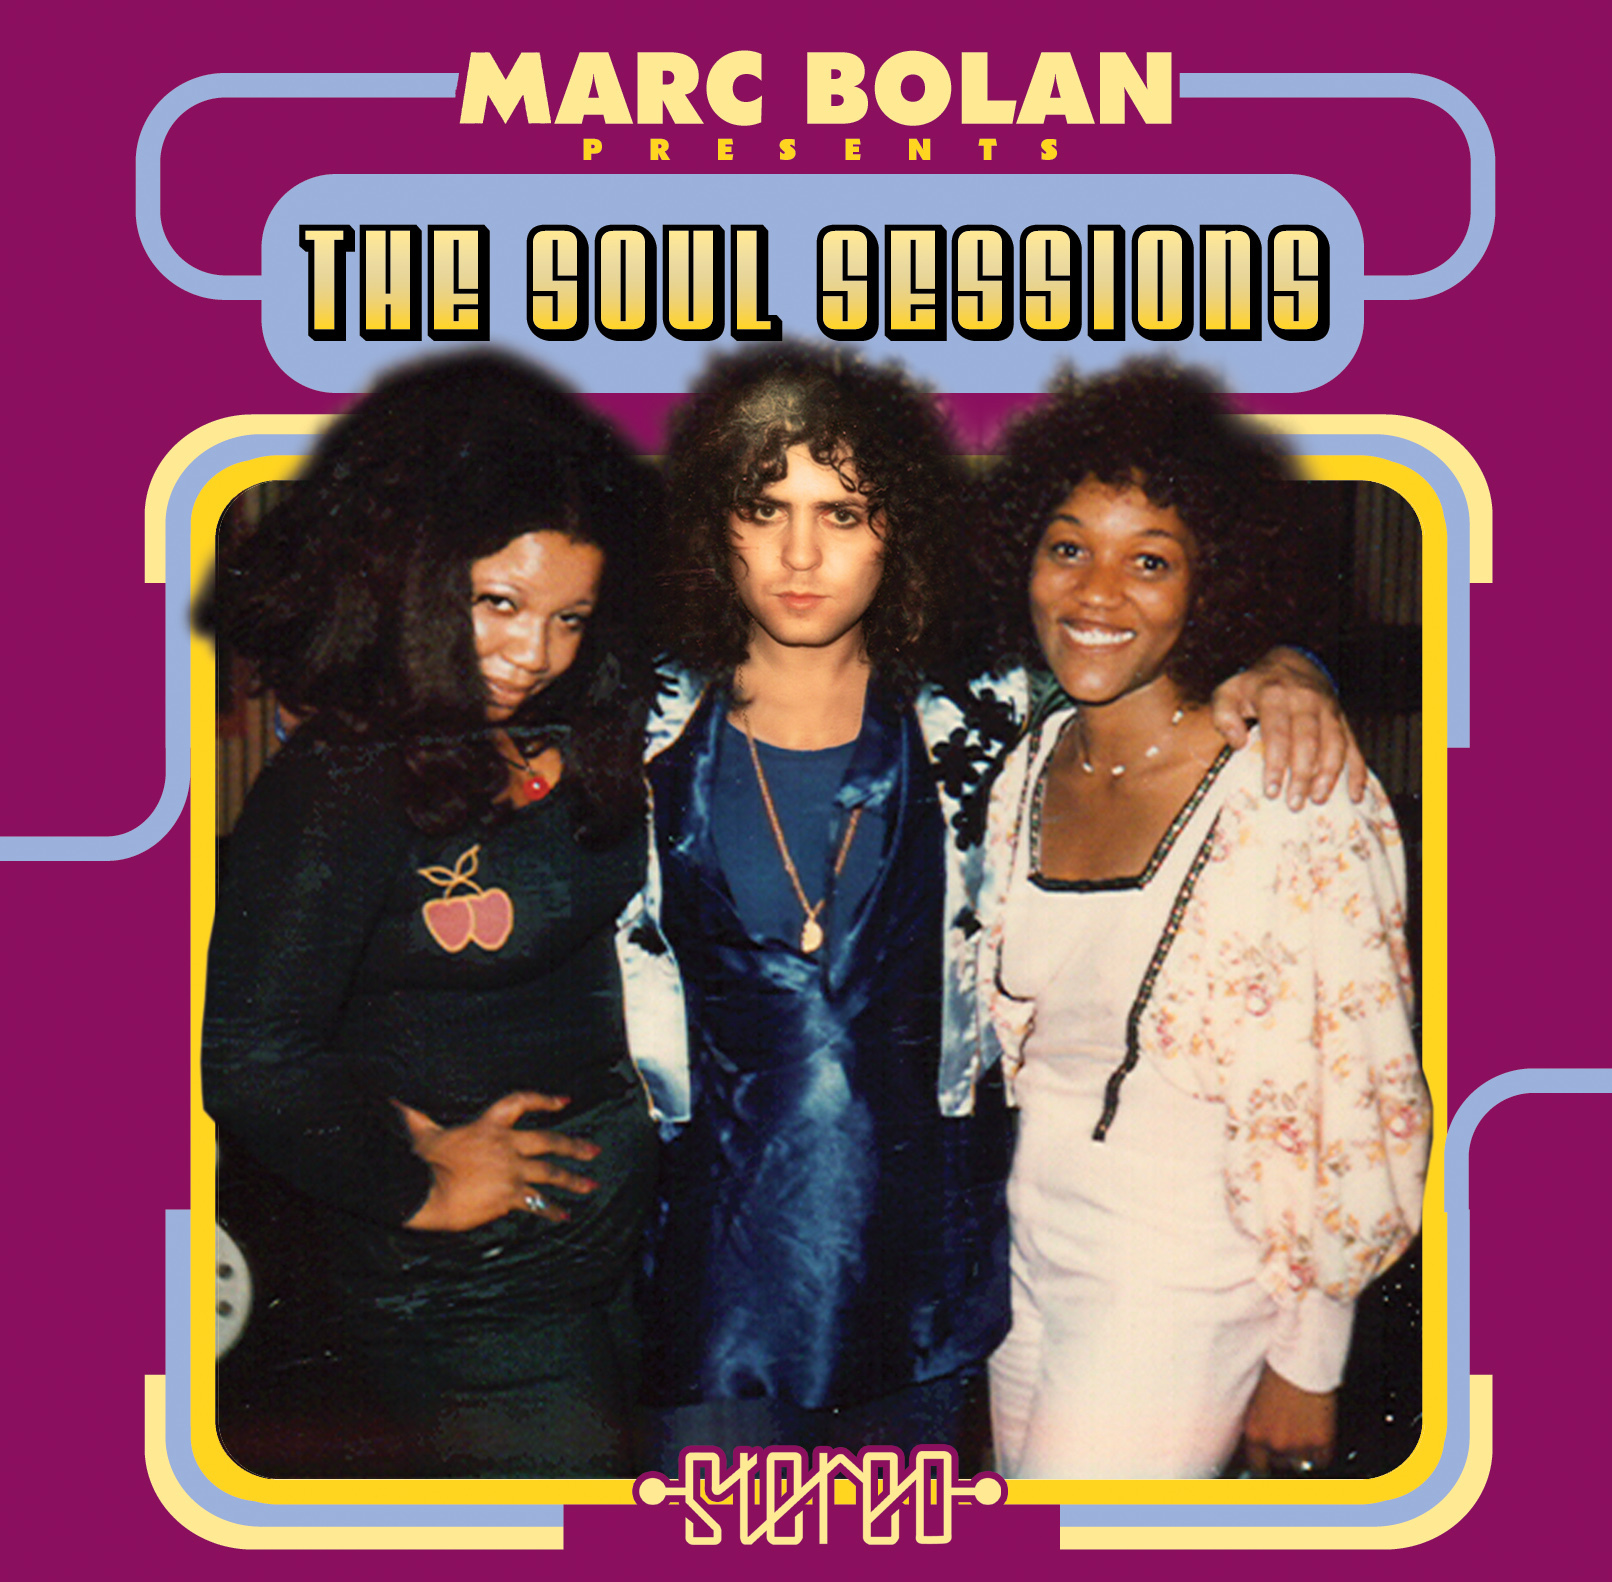 Marc Bolan - The Soul Sessions